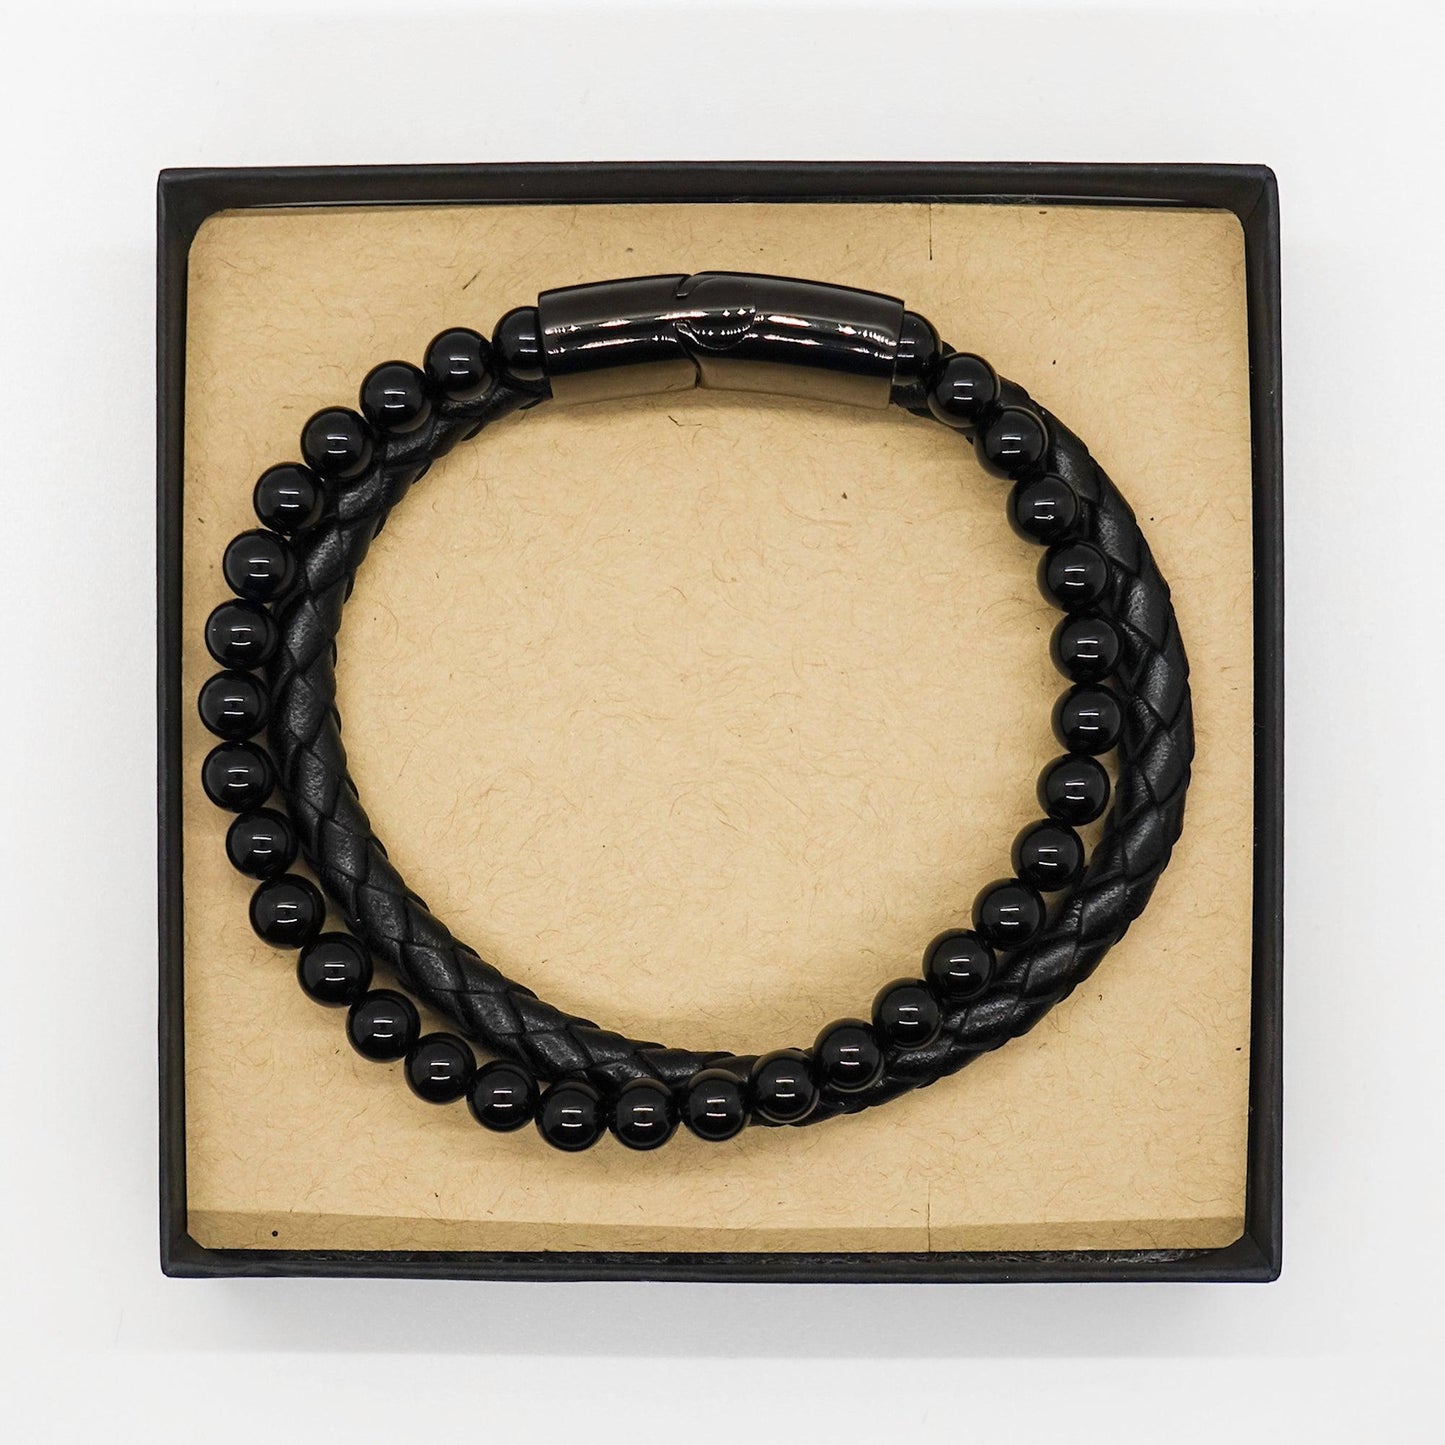 Cook Black Braided Stone Leather Bracelet - Thanks for being who you are - Birthday Christmas Jewelry Gifts Coworkers Colleague Boss - Mallard Moon Gift Shop